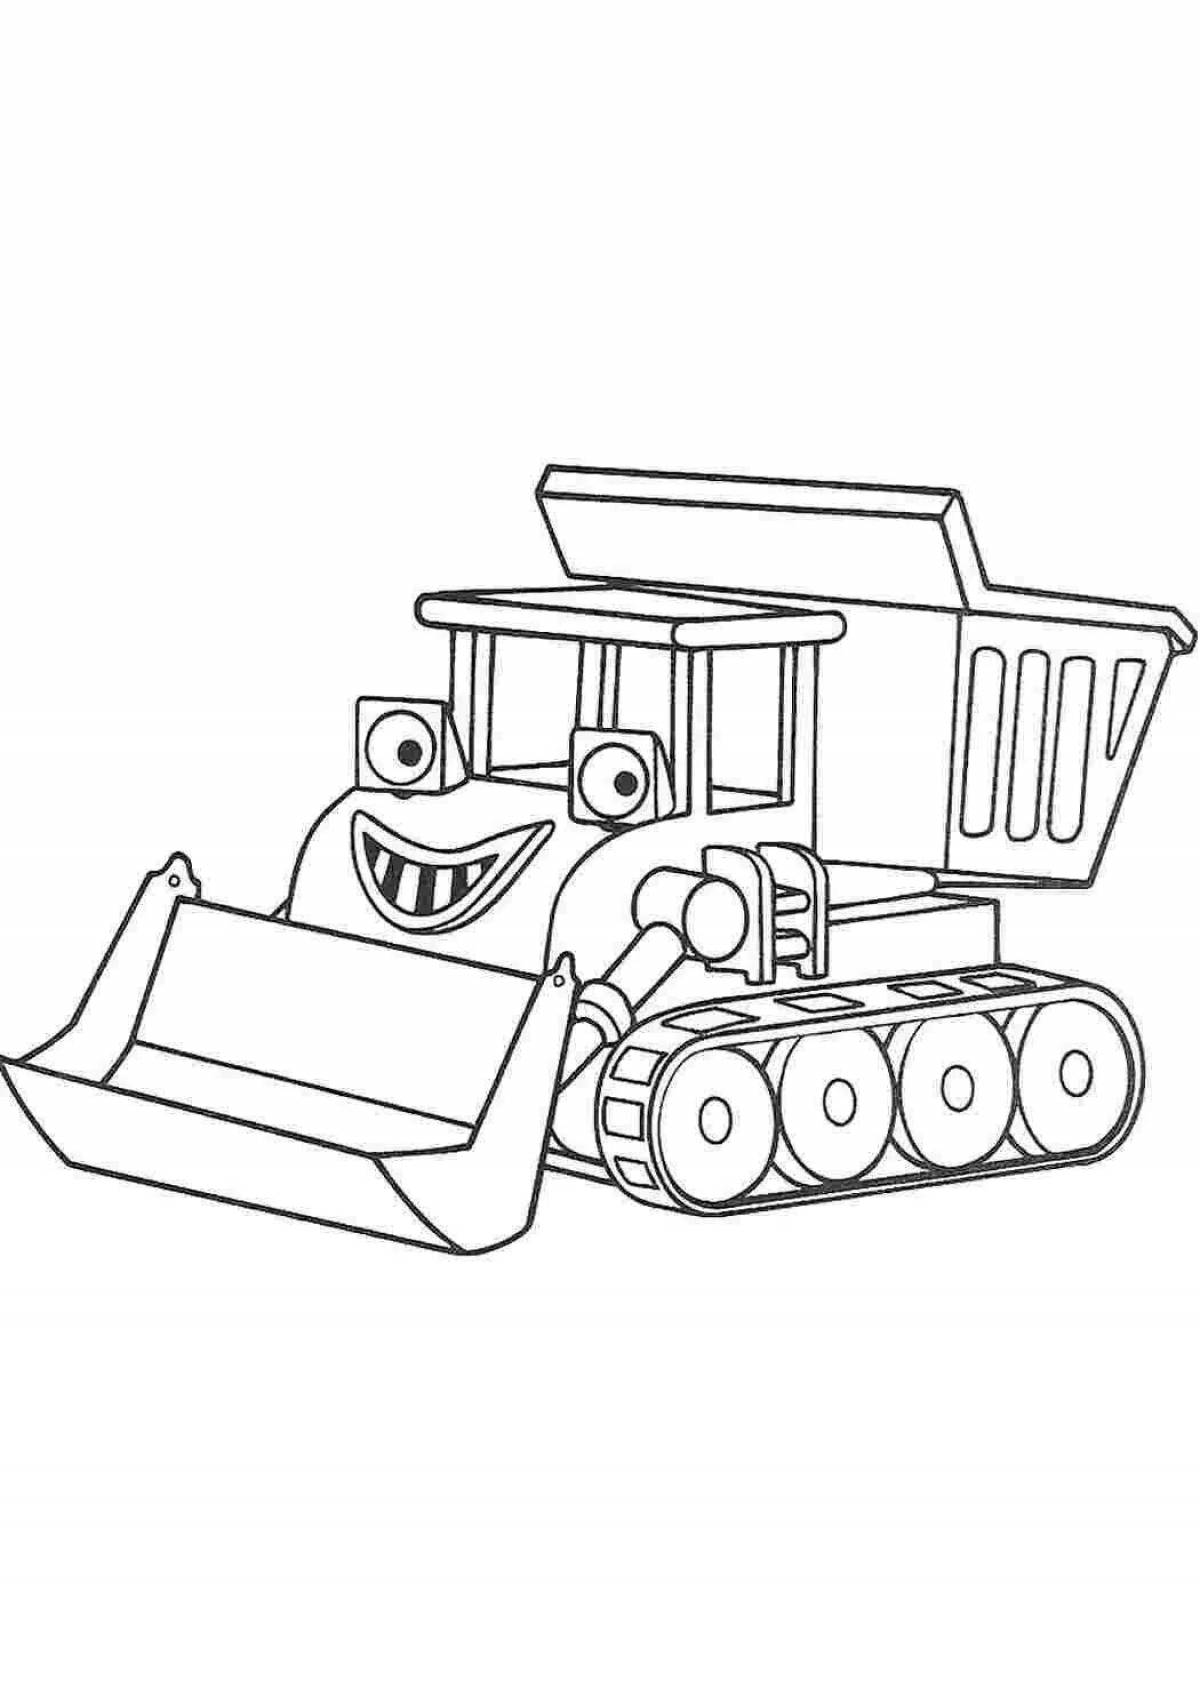 Tempting construction machinery coloring page for boys